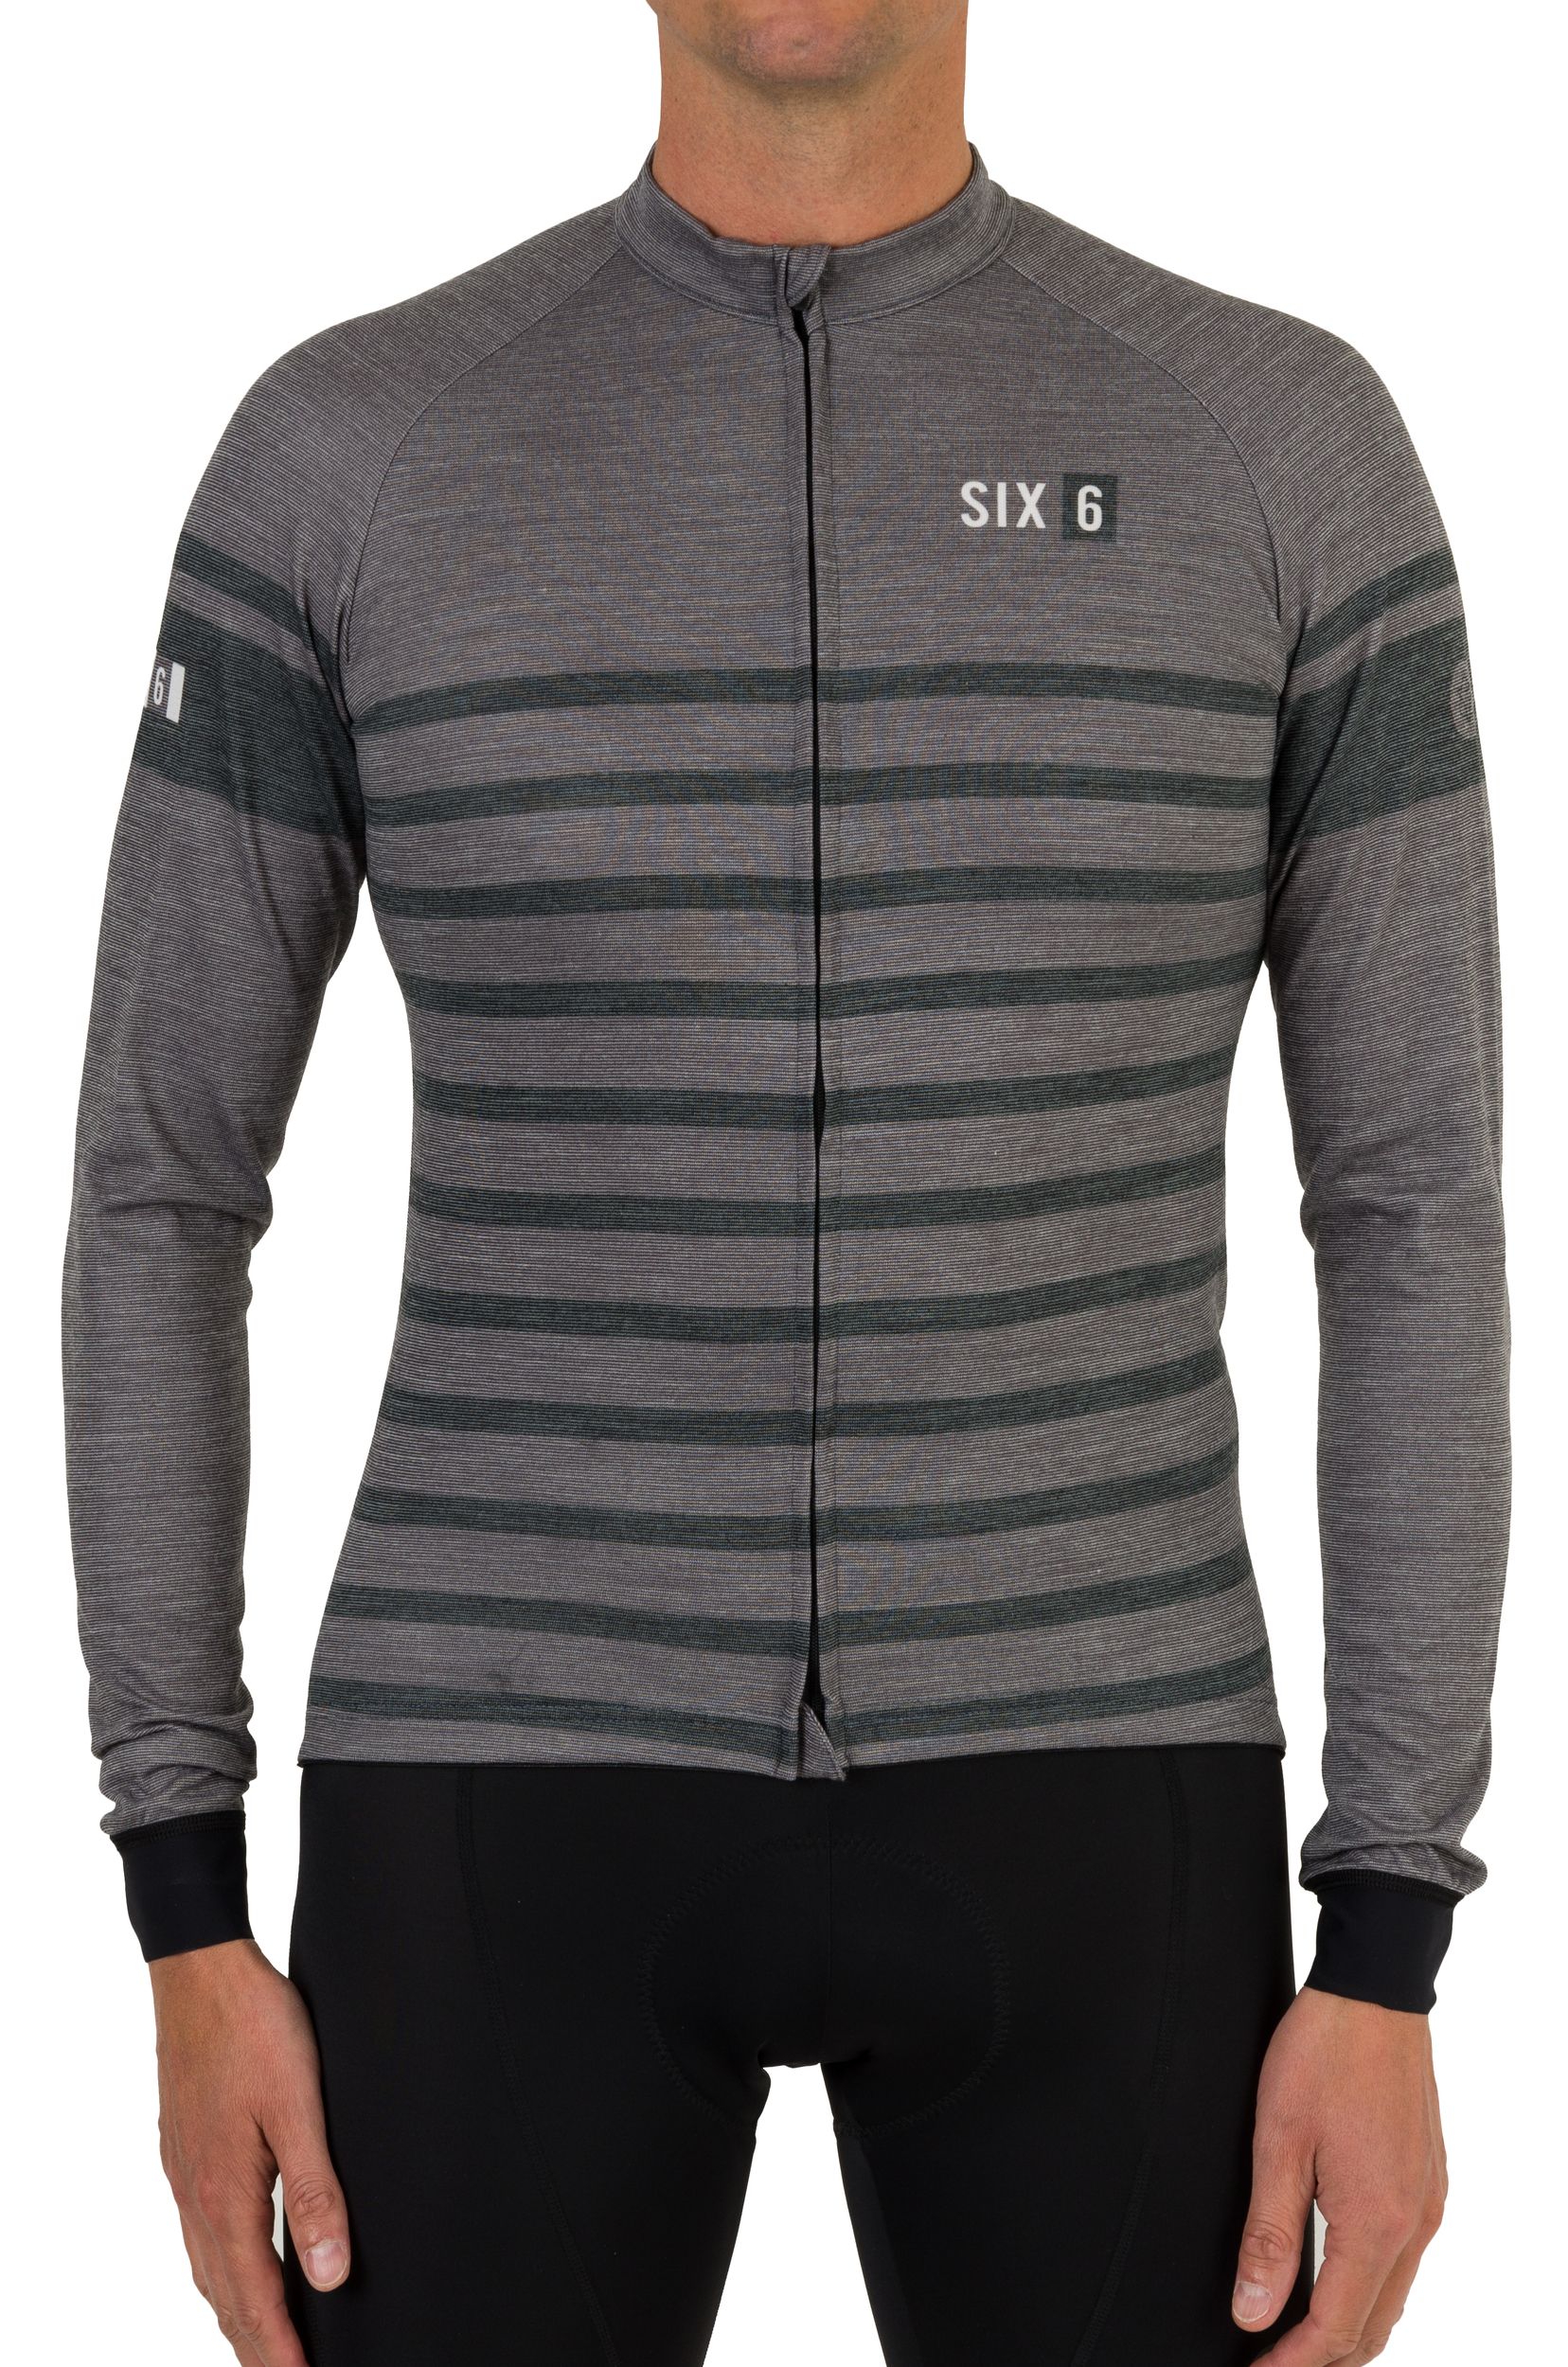 Merino Maillot M/L SIX6 Hombres fit example